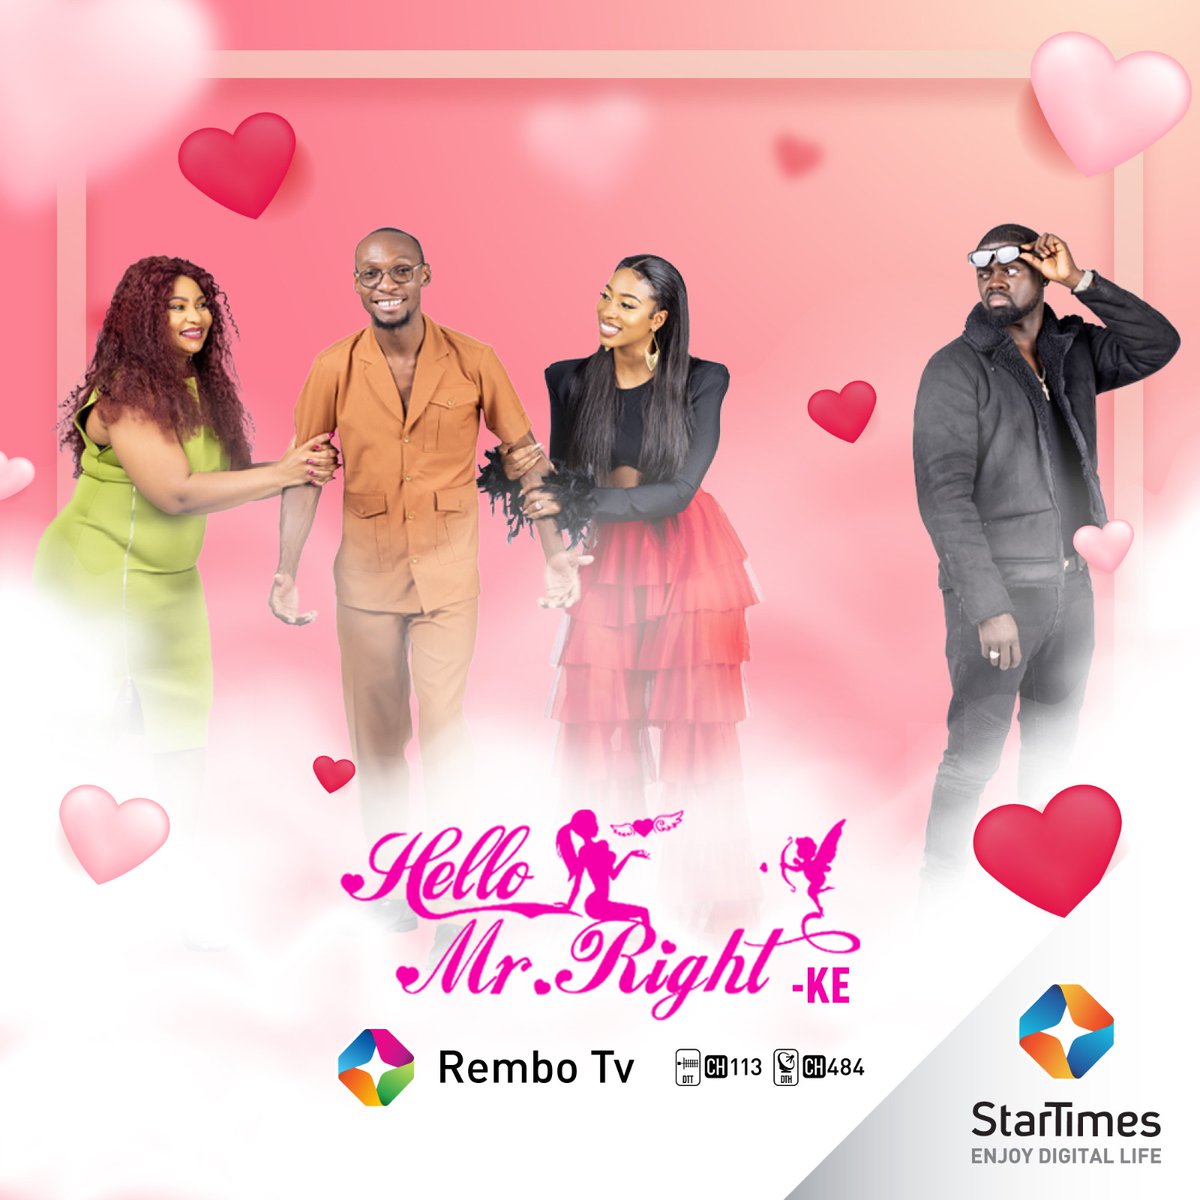 Hello Mr Right is loved by many individuals you can stream it today on starTimes app with the right bouquet
#AllUnderOneRoof
#ZipateStarTimes